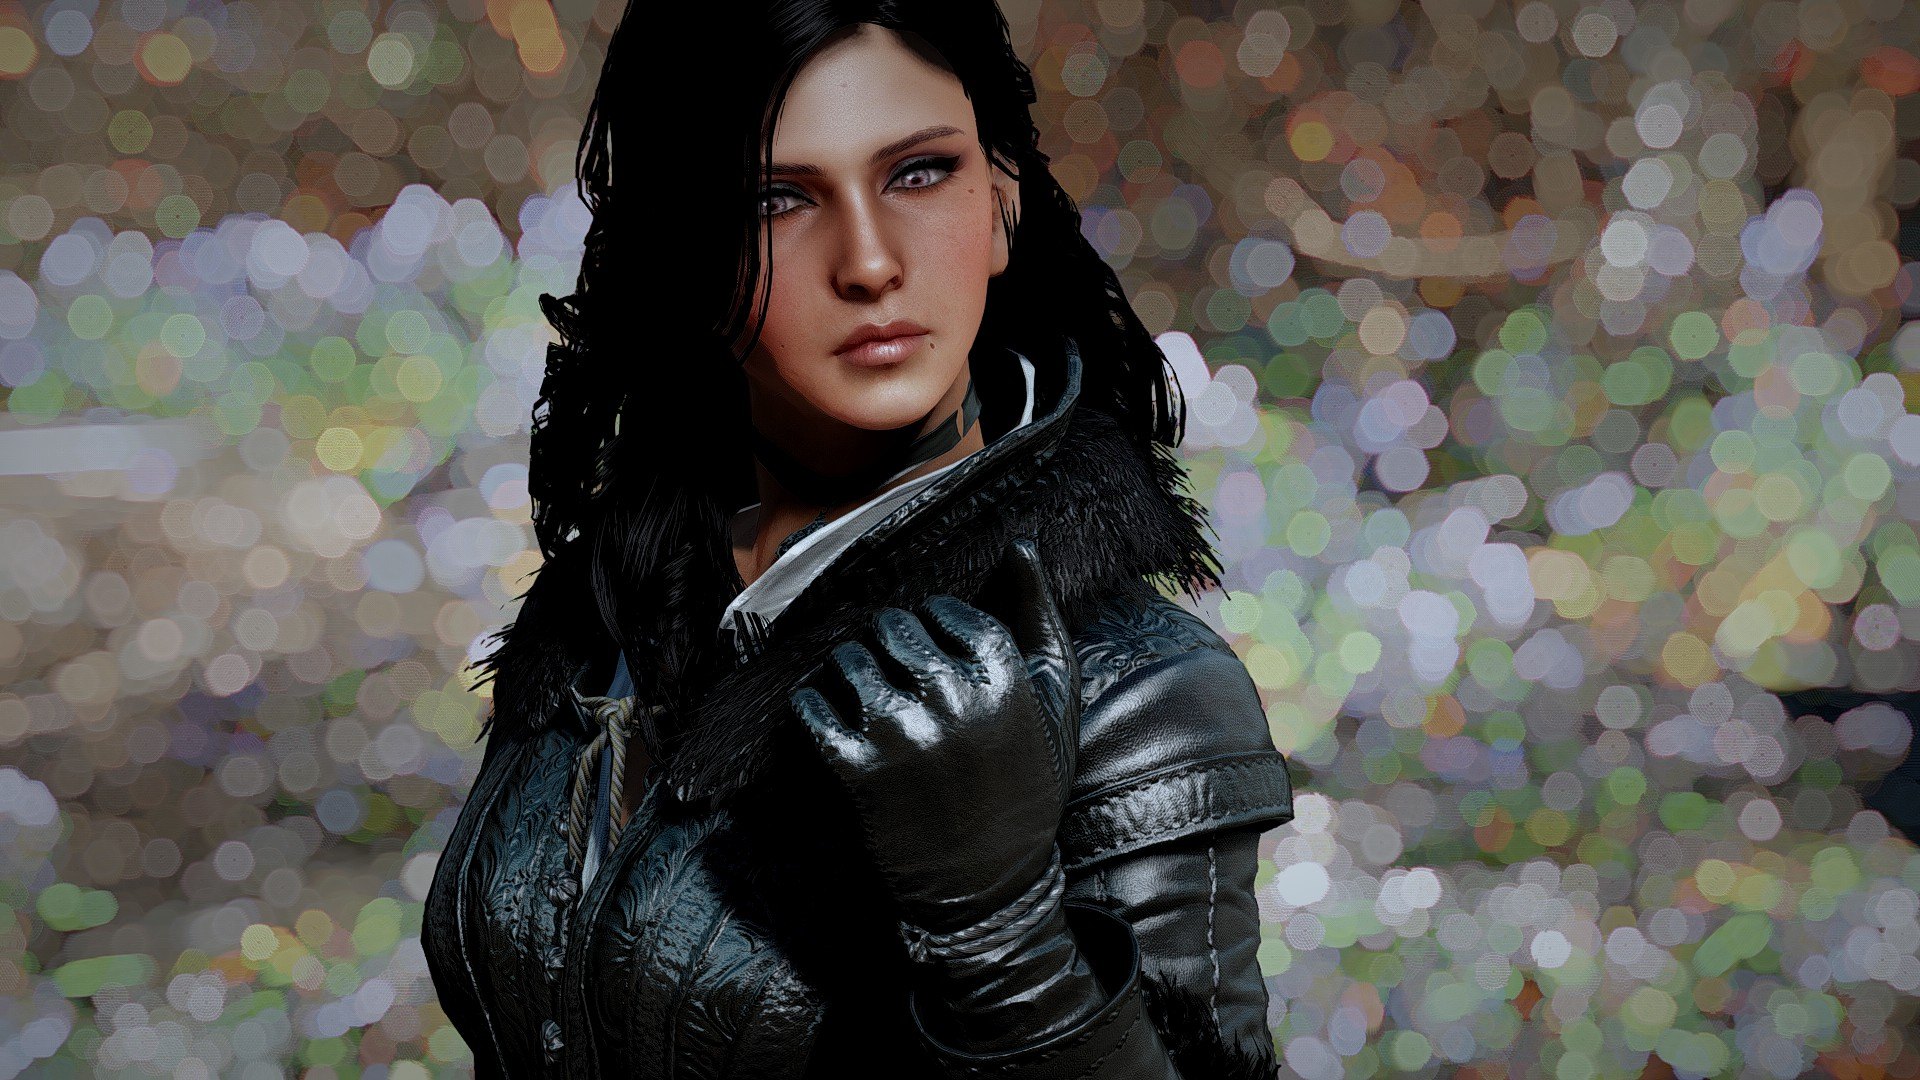 Yennefer of vengerberg the witcher 3 voiced standalone follower se фото 108